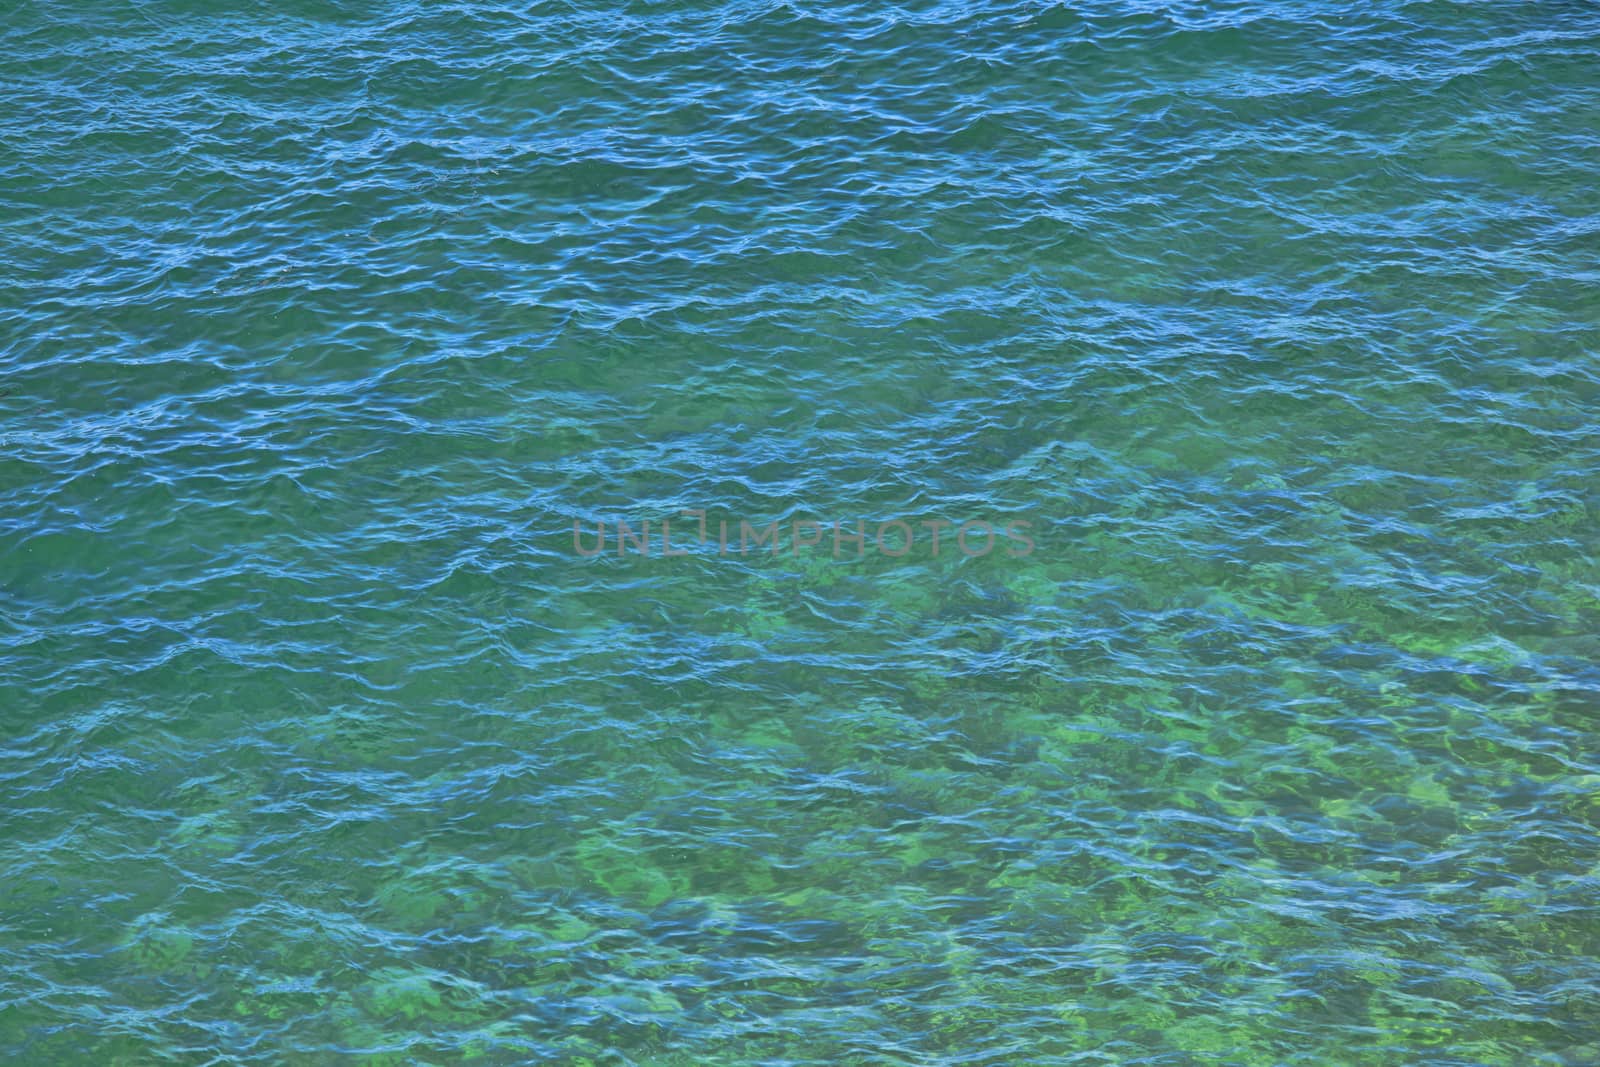 Water surface with small waves  by kalnenko